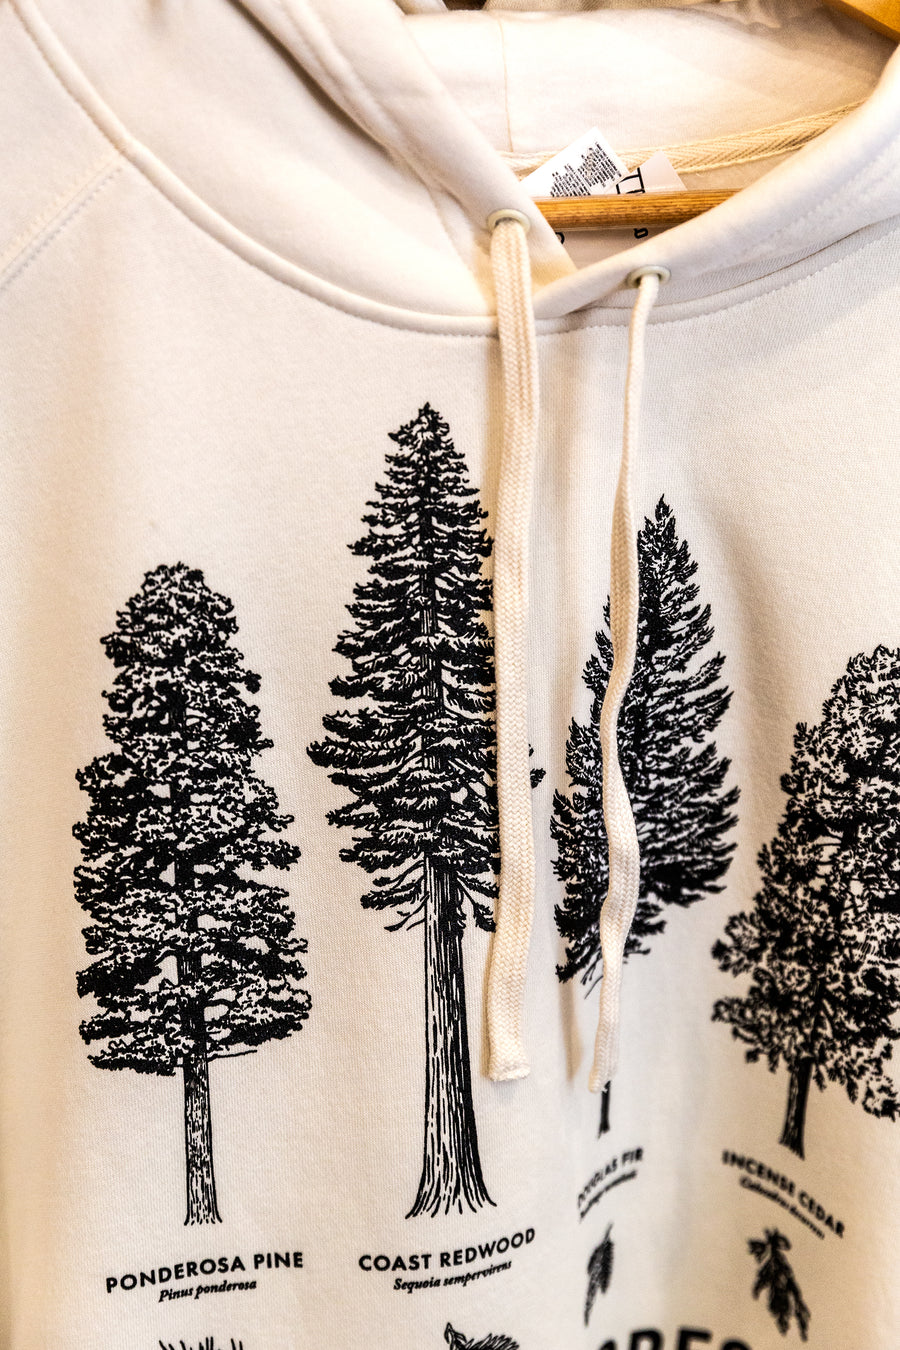 California Forests Supply Hoodie